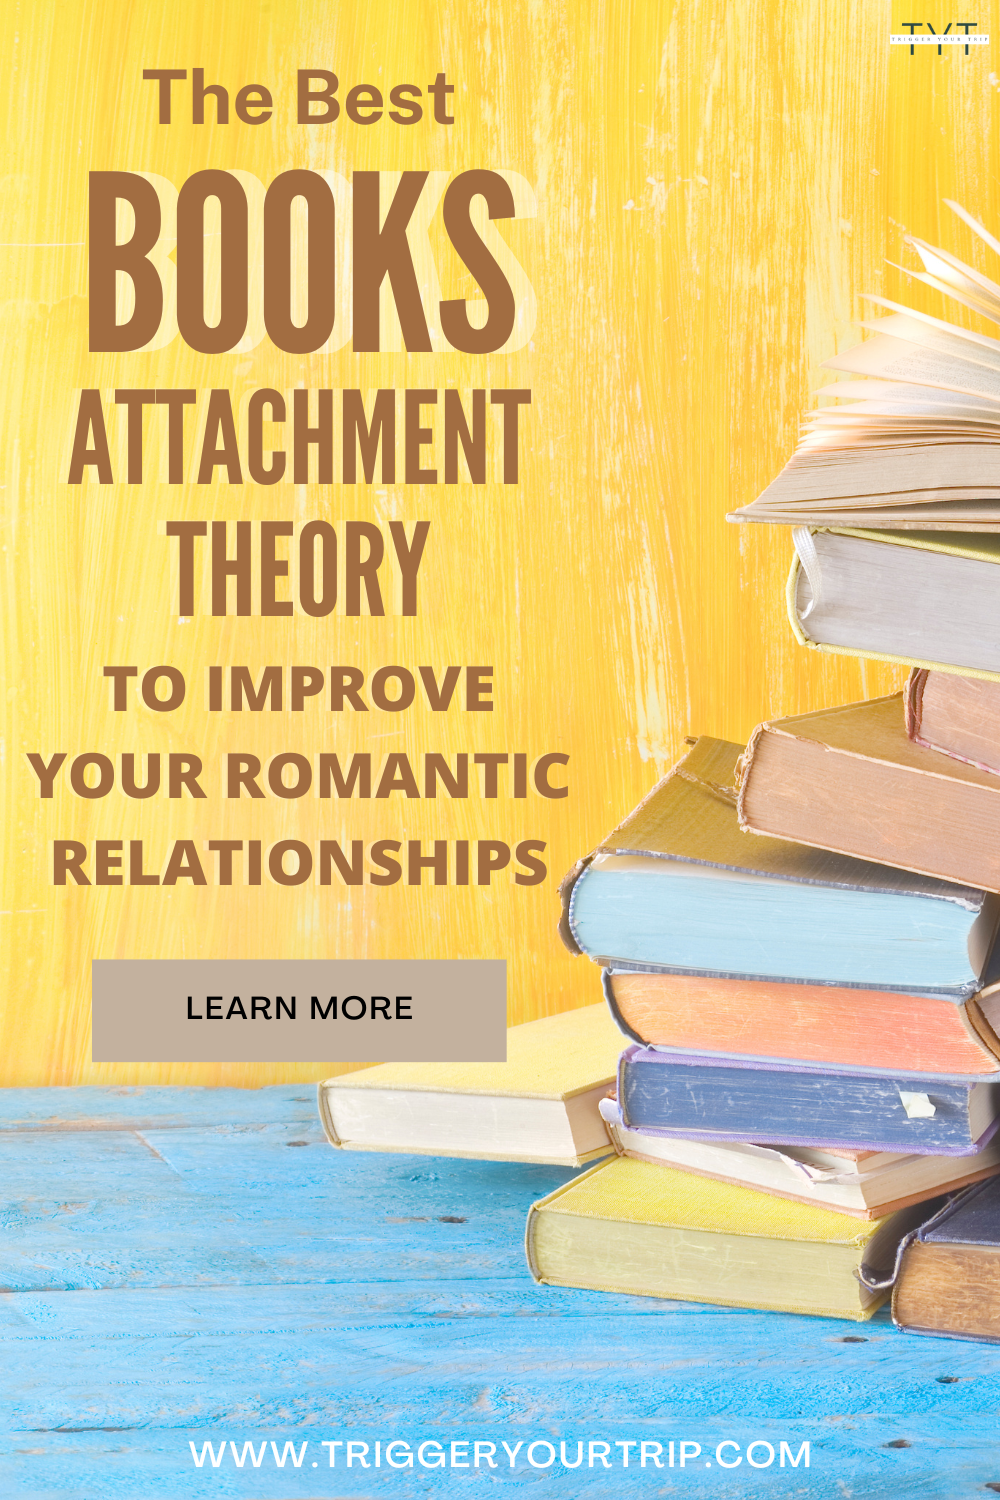 books on attachment theory and attachment theory workbook